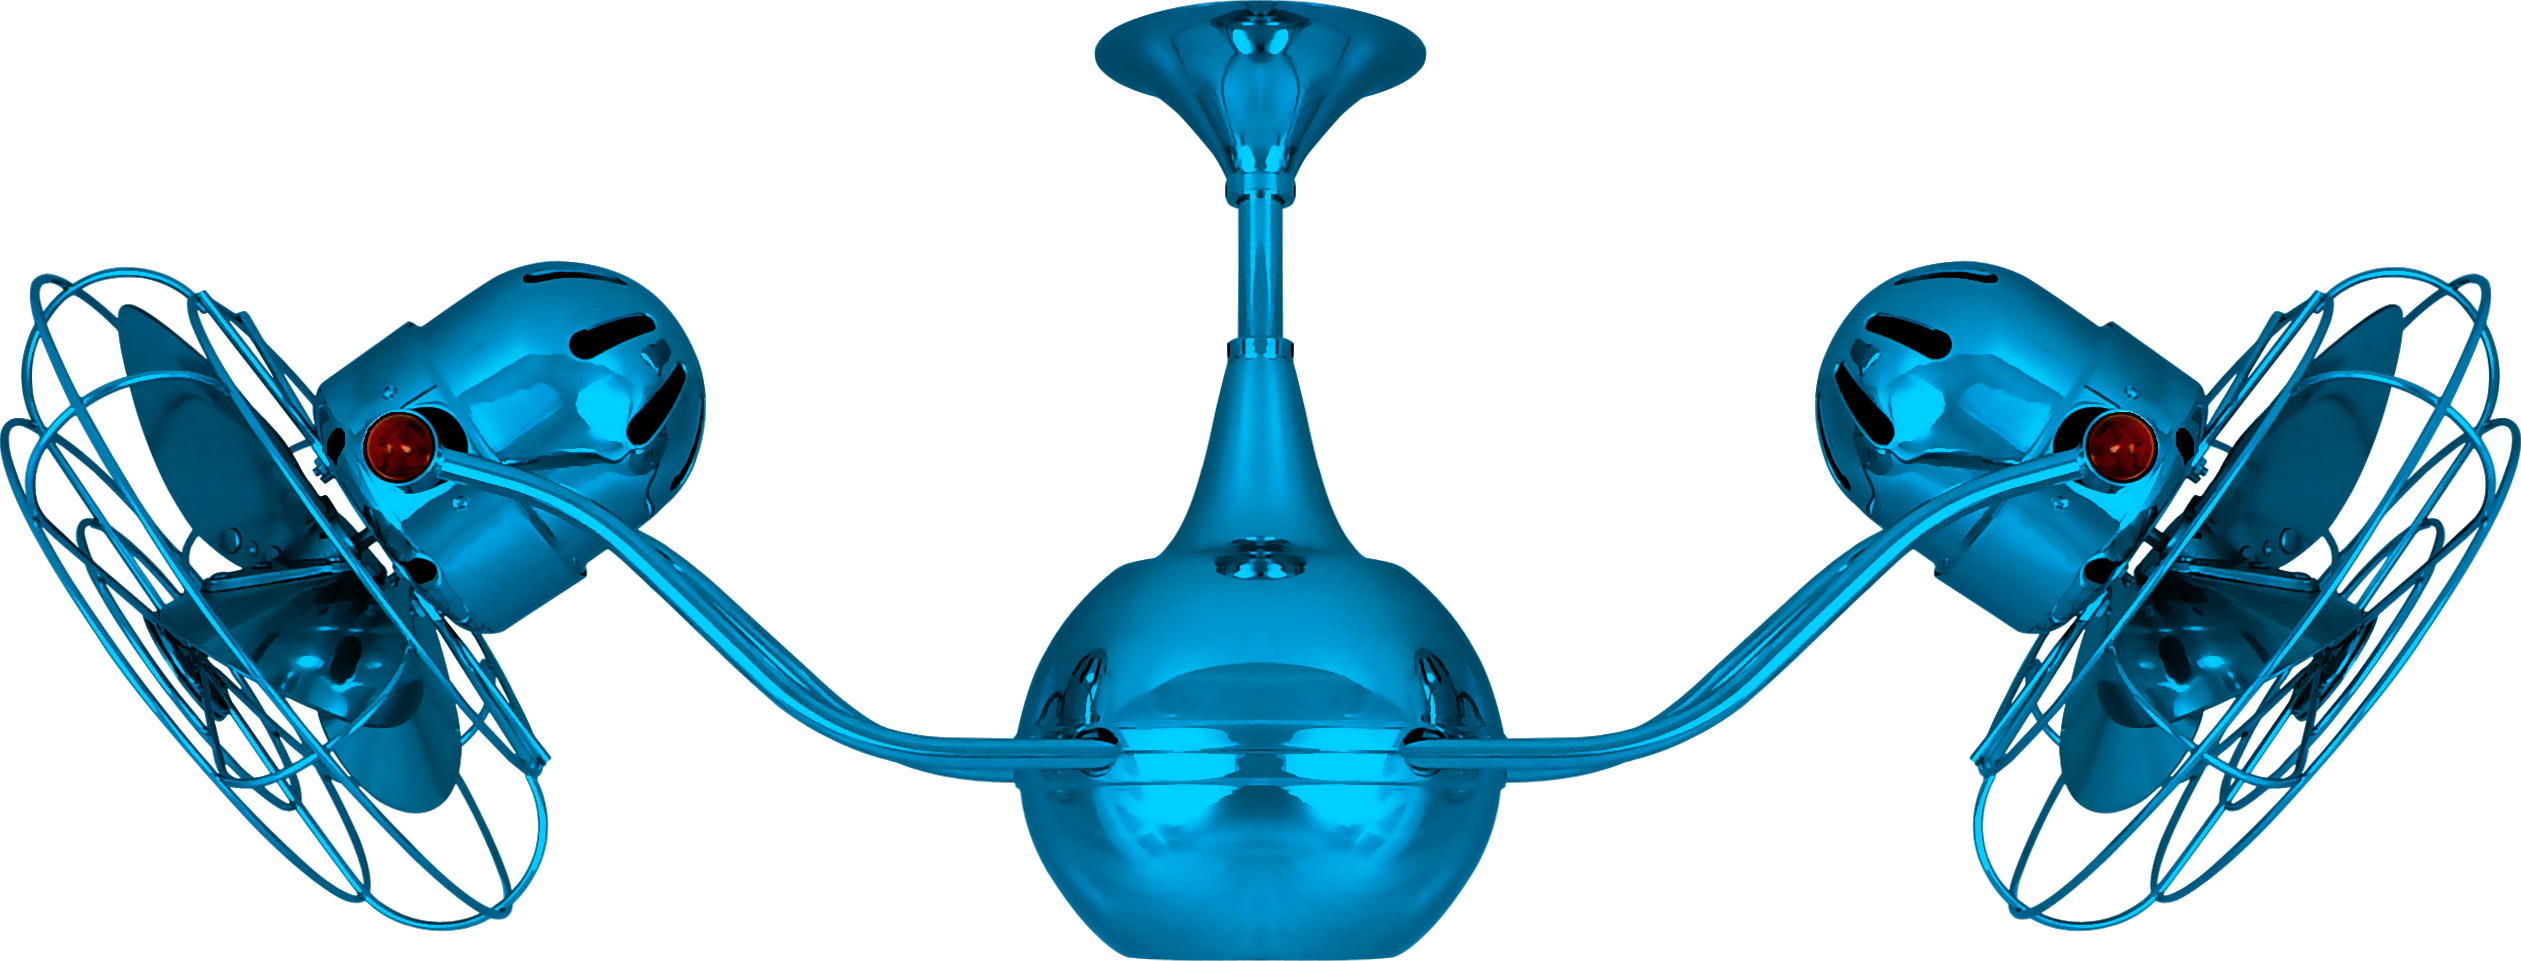 Vent-Bettina Rotational Dual Head Ceiling Fan in Agua Marinha / Light Blue Finish with Metal Blades and Decorative Cage